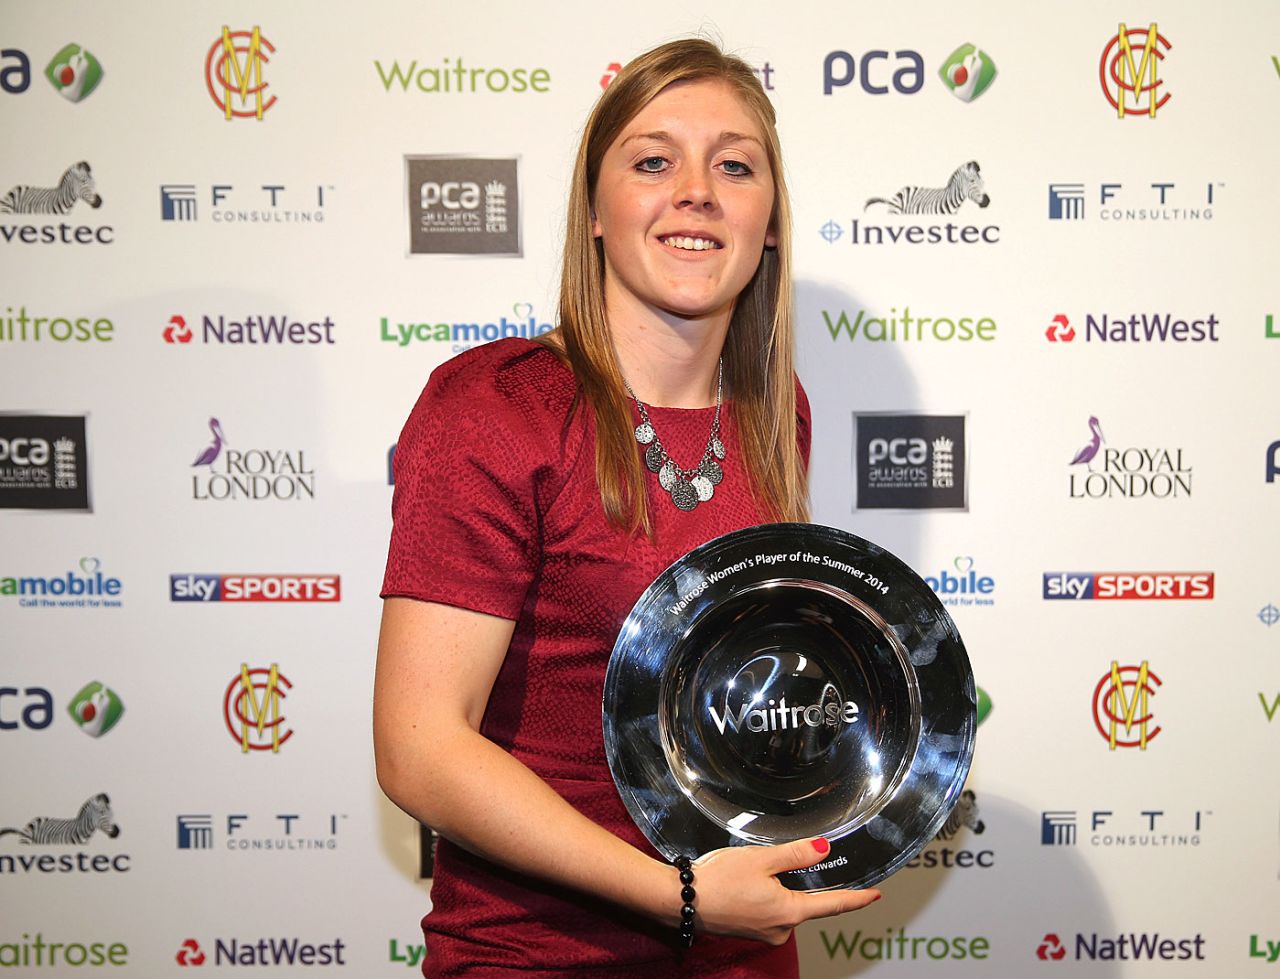 Heather Knight was named Women's Player of the Summer at the PCA Awards, London, October 1, 2014